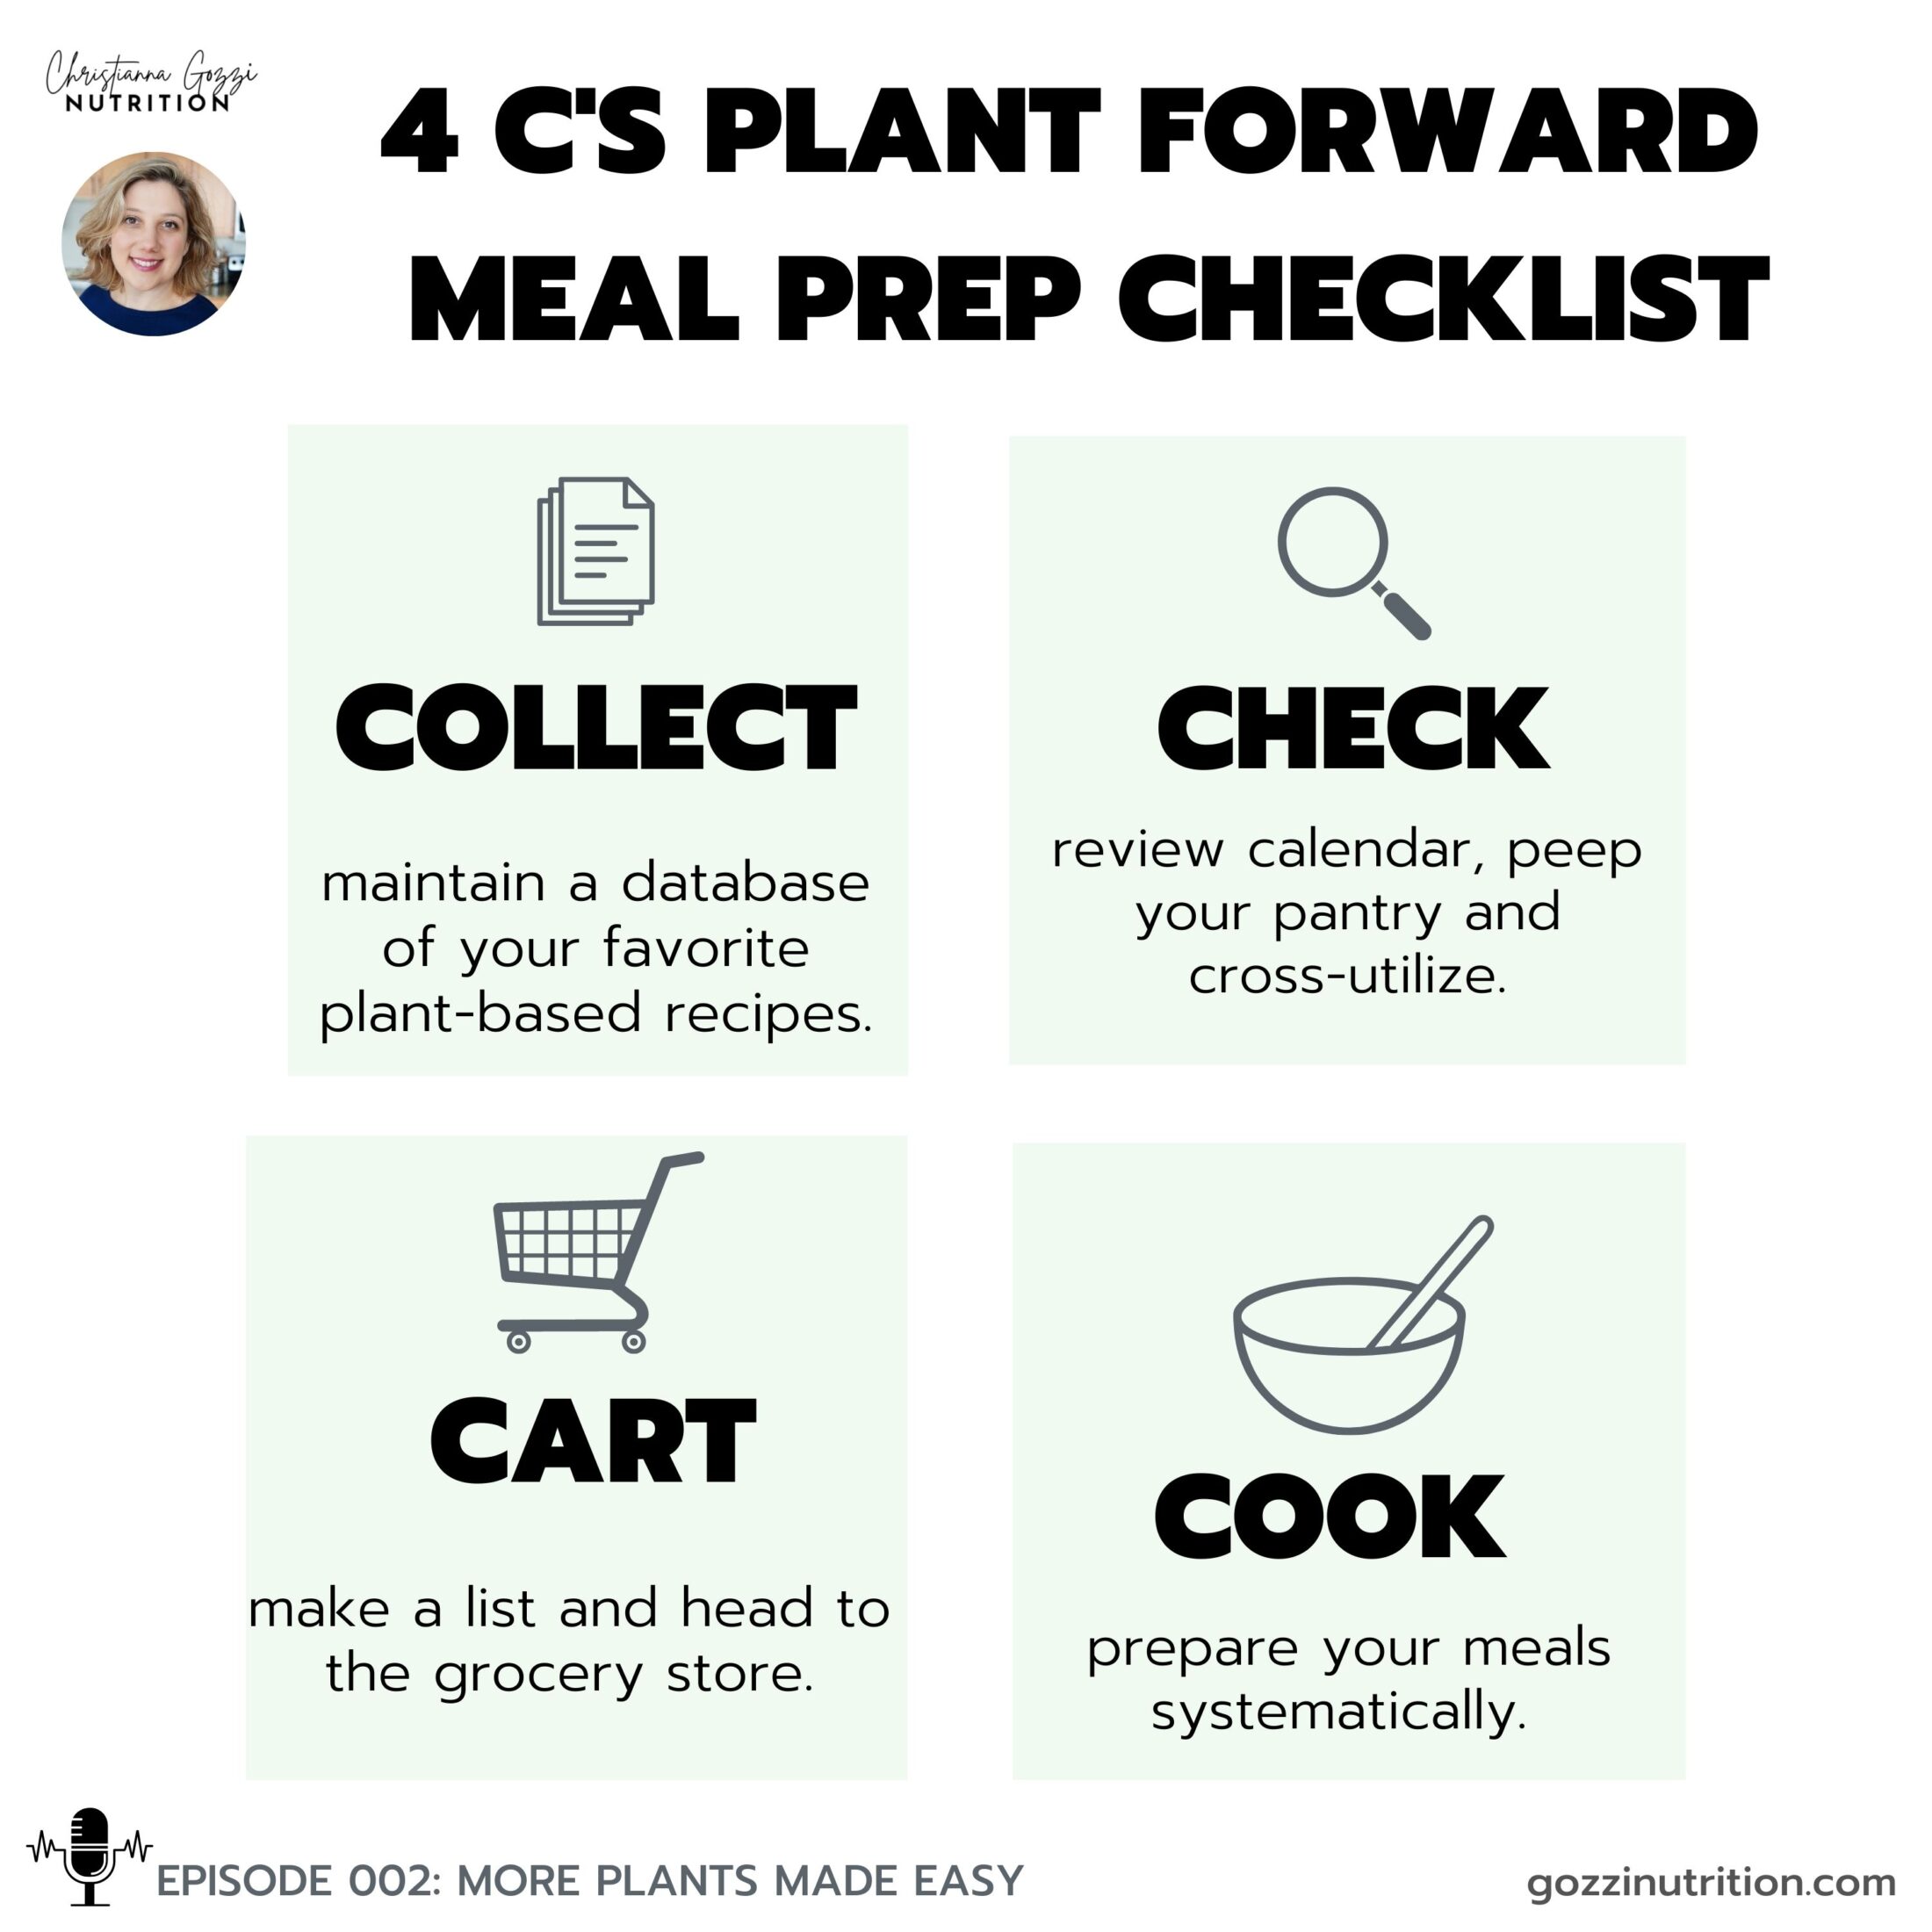 how to plan and prep plant forward meals